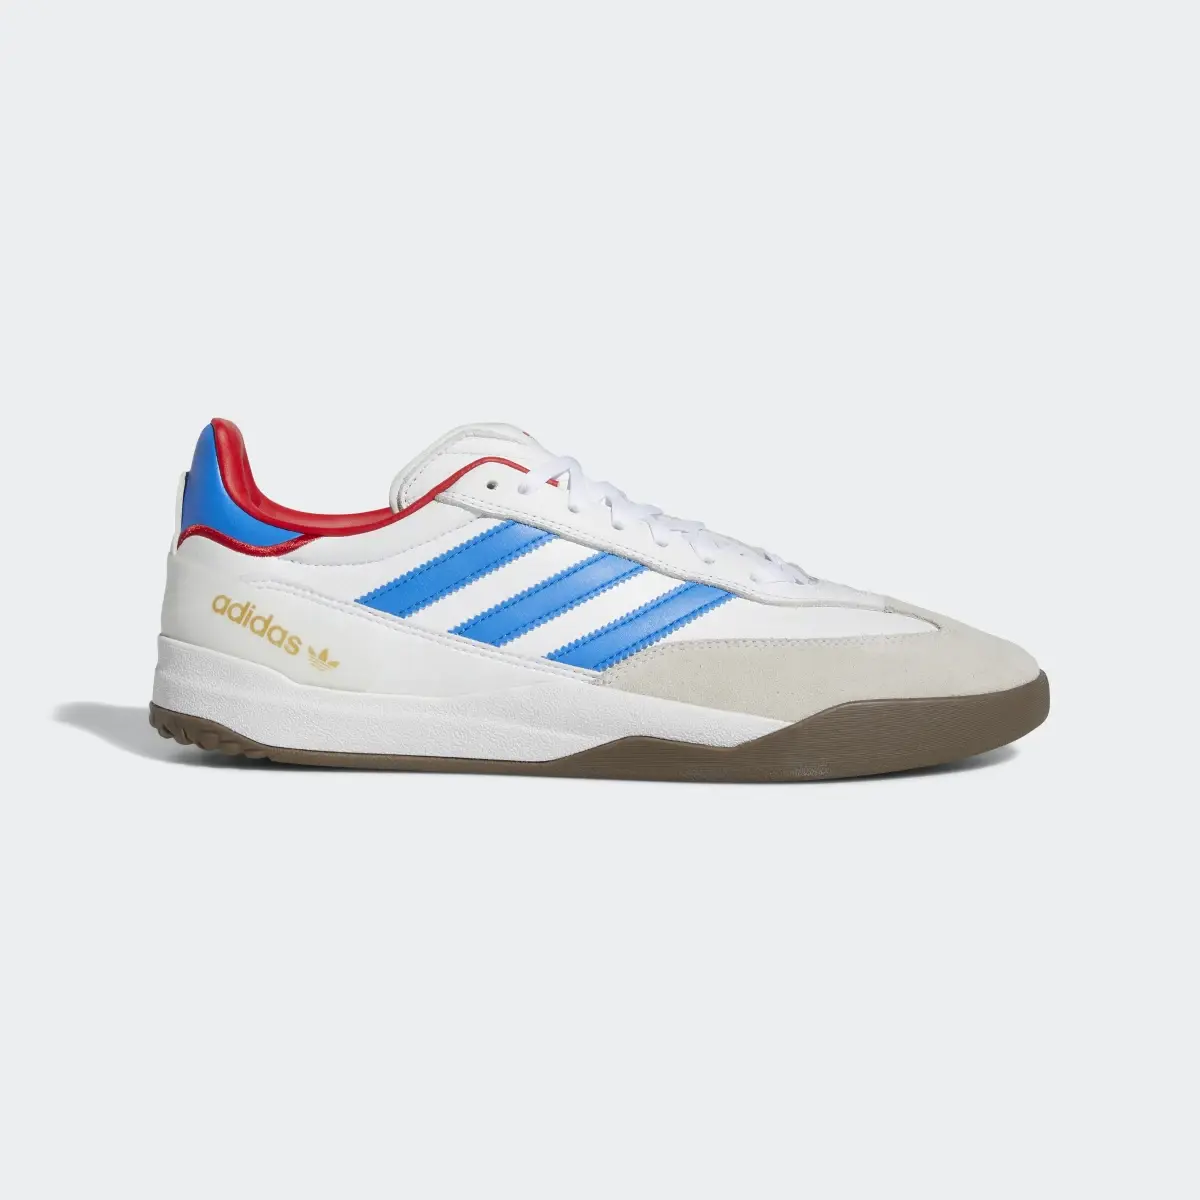 Adidas Copa Nationale Shoes. 2